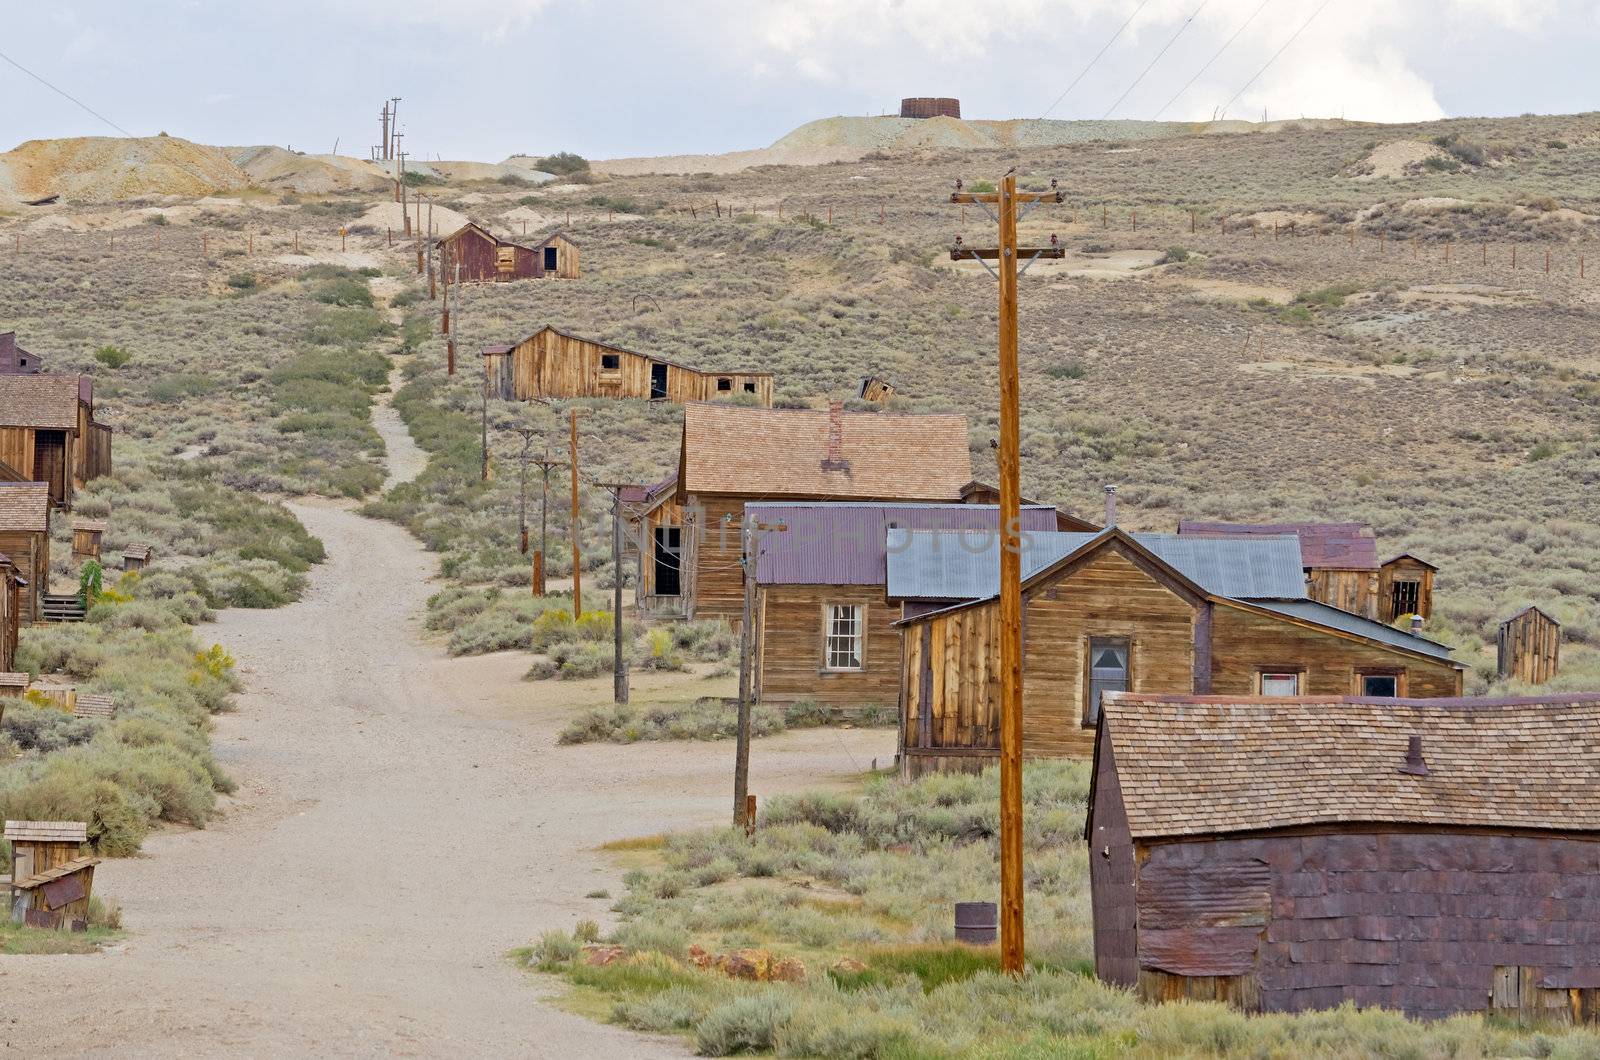 Ghost Town of Bodie, California